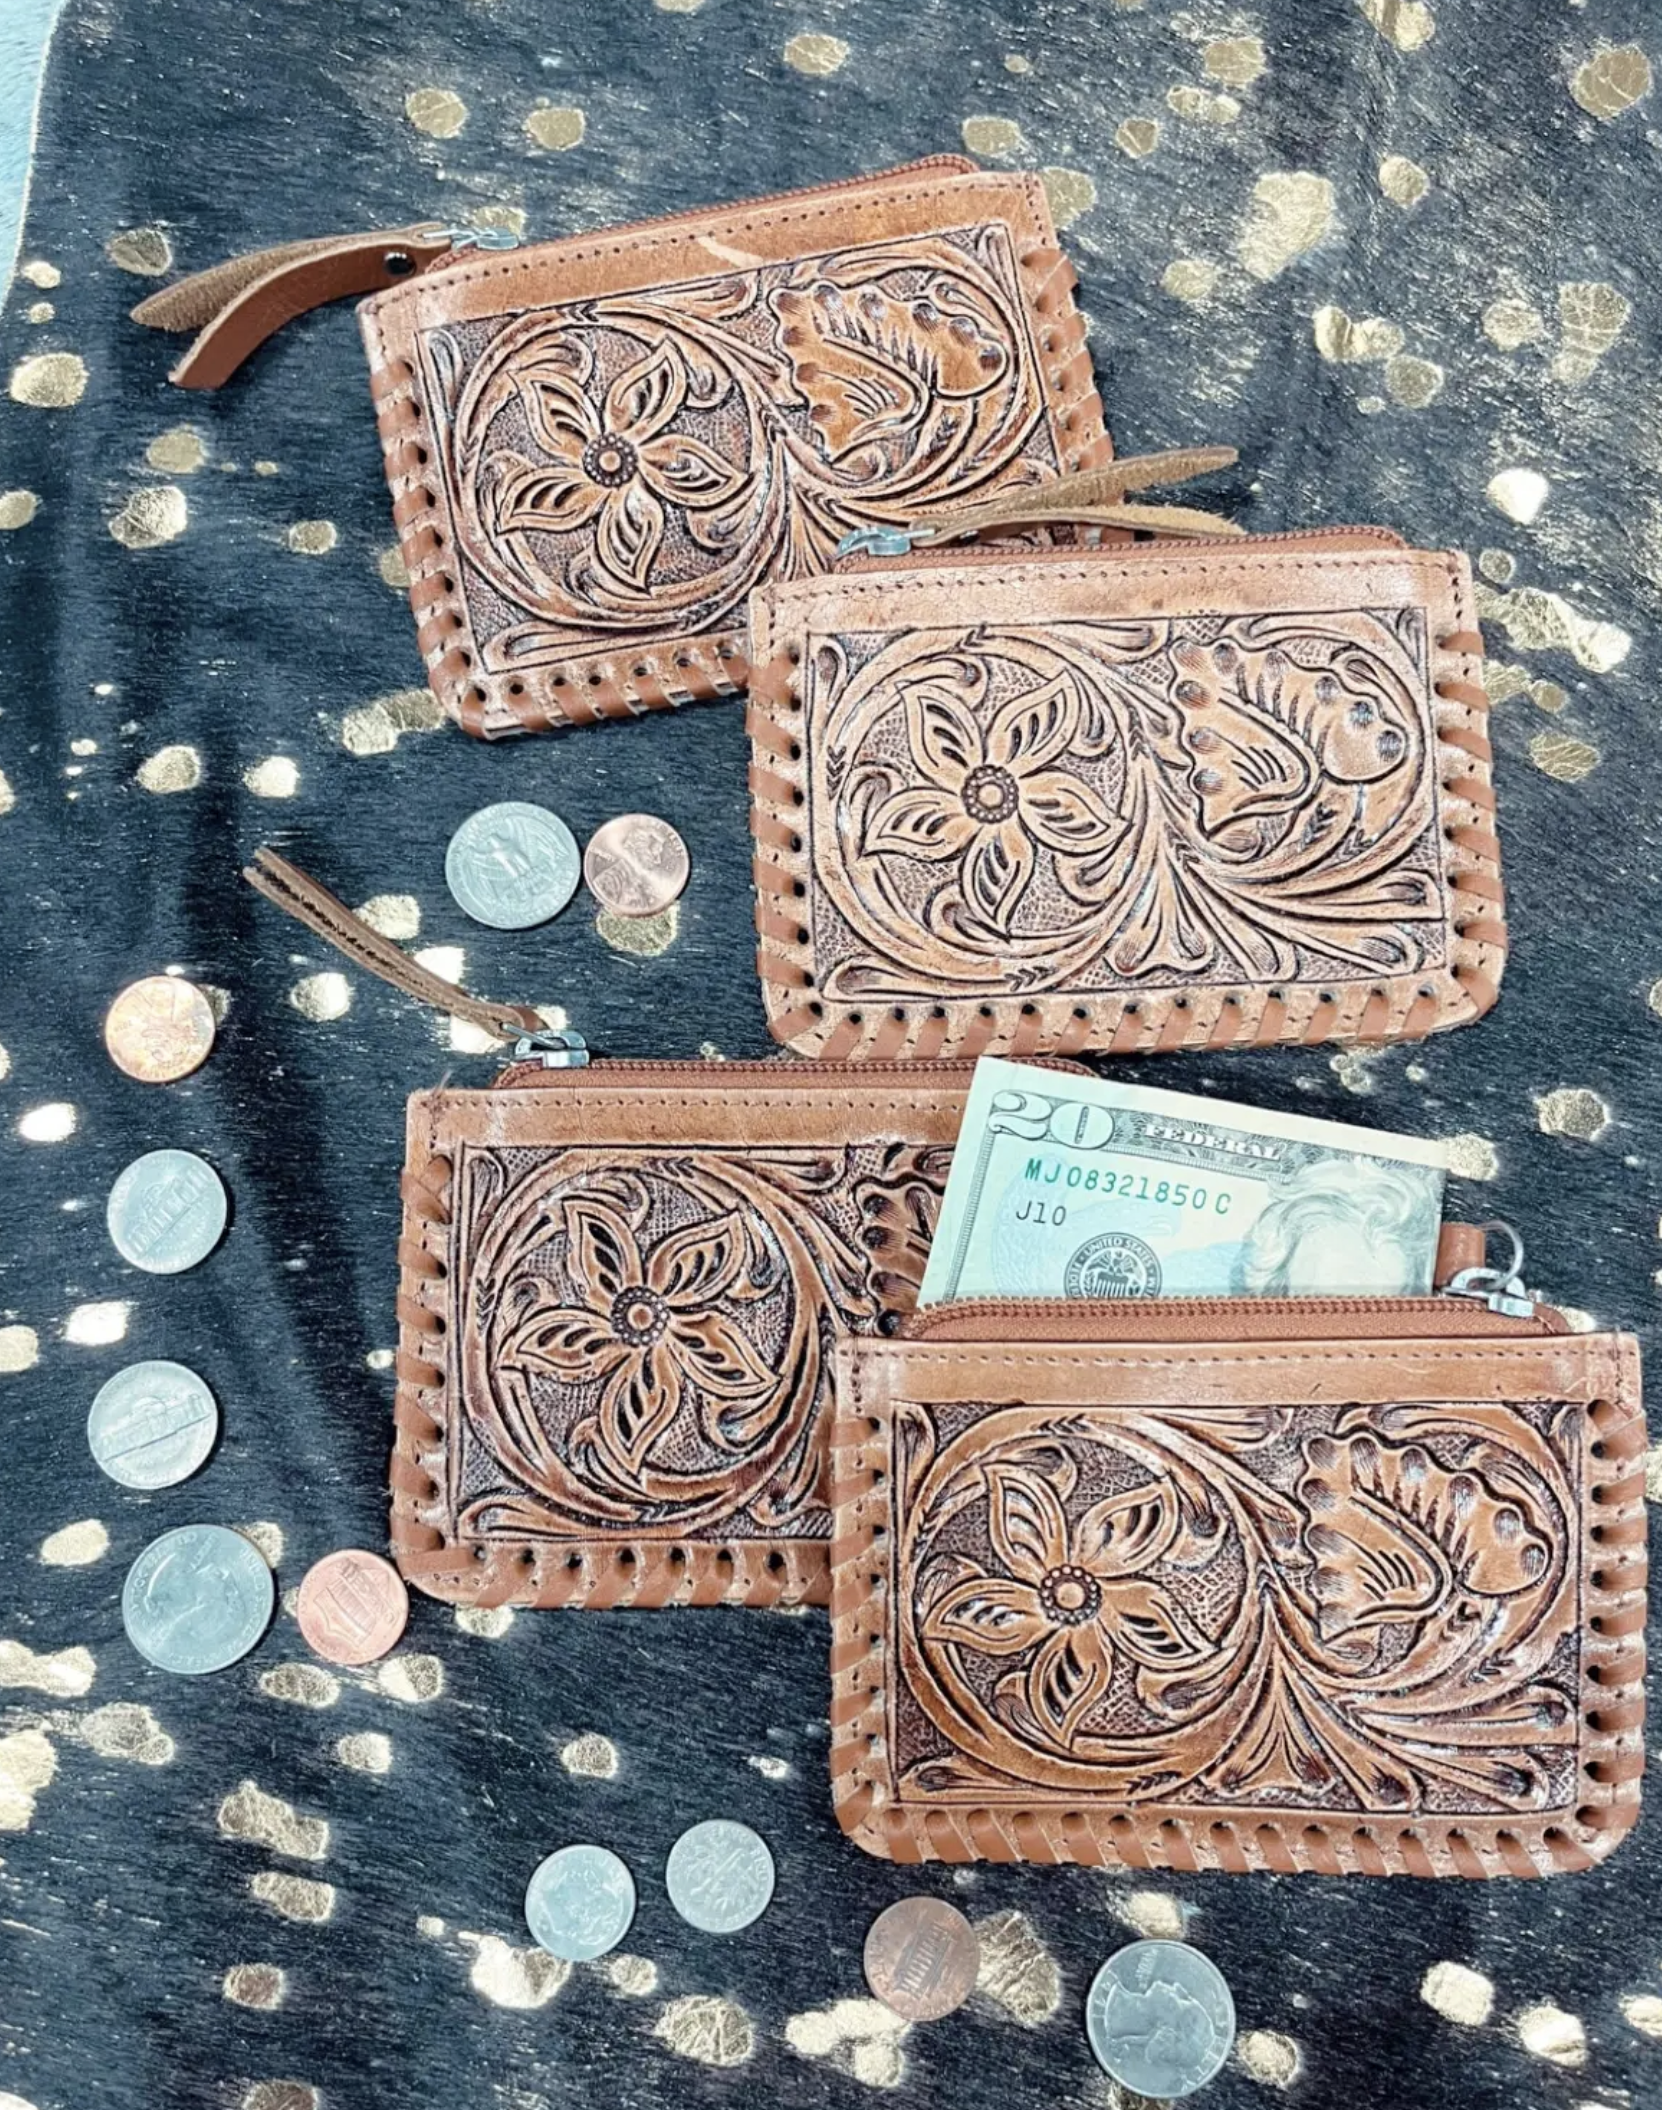 Tooled Leather Coin Purse